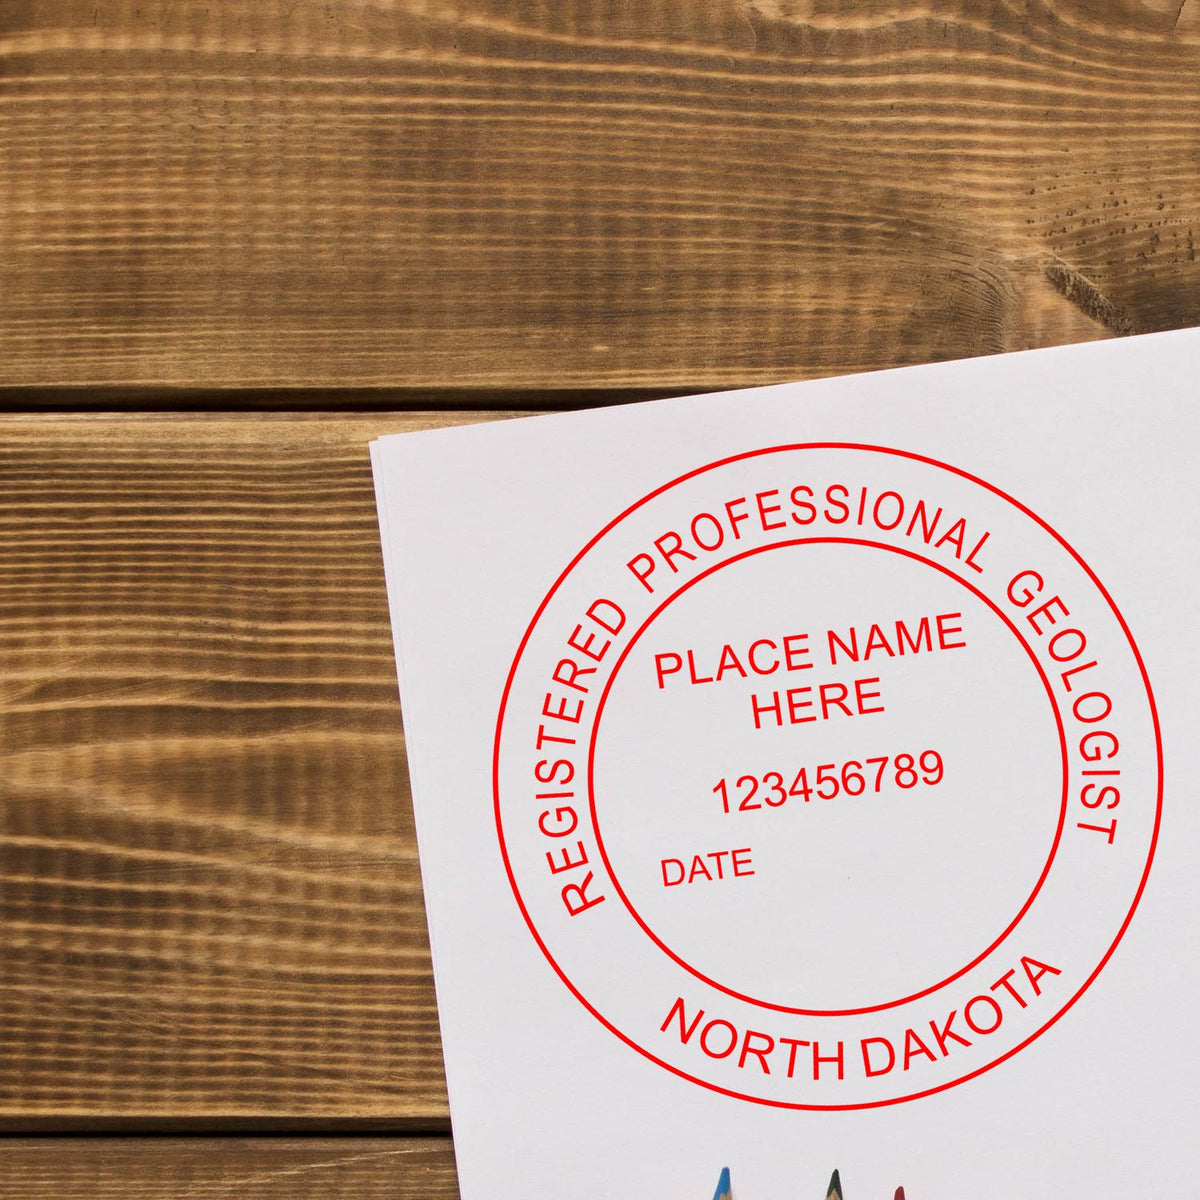 A lifestyle photo showing a stamped image of the North Dakota Professional Geologist Seal Stamp on a piece of paper